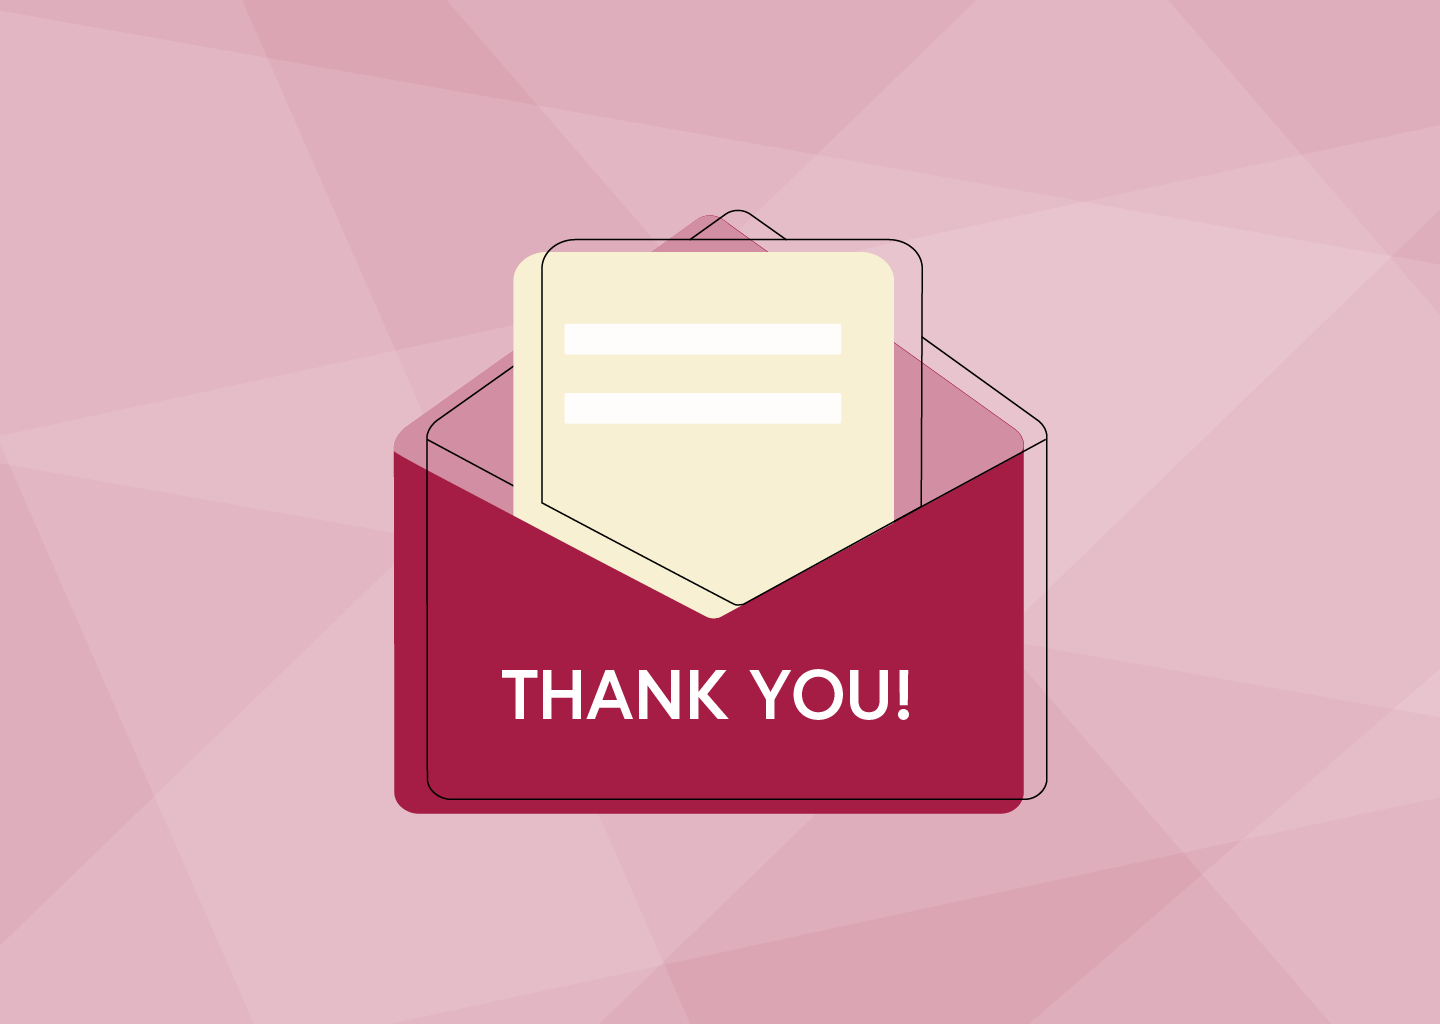 60 Ways for Businesses to Say “Thank You” this Holiday Season